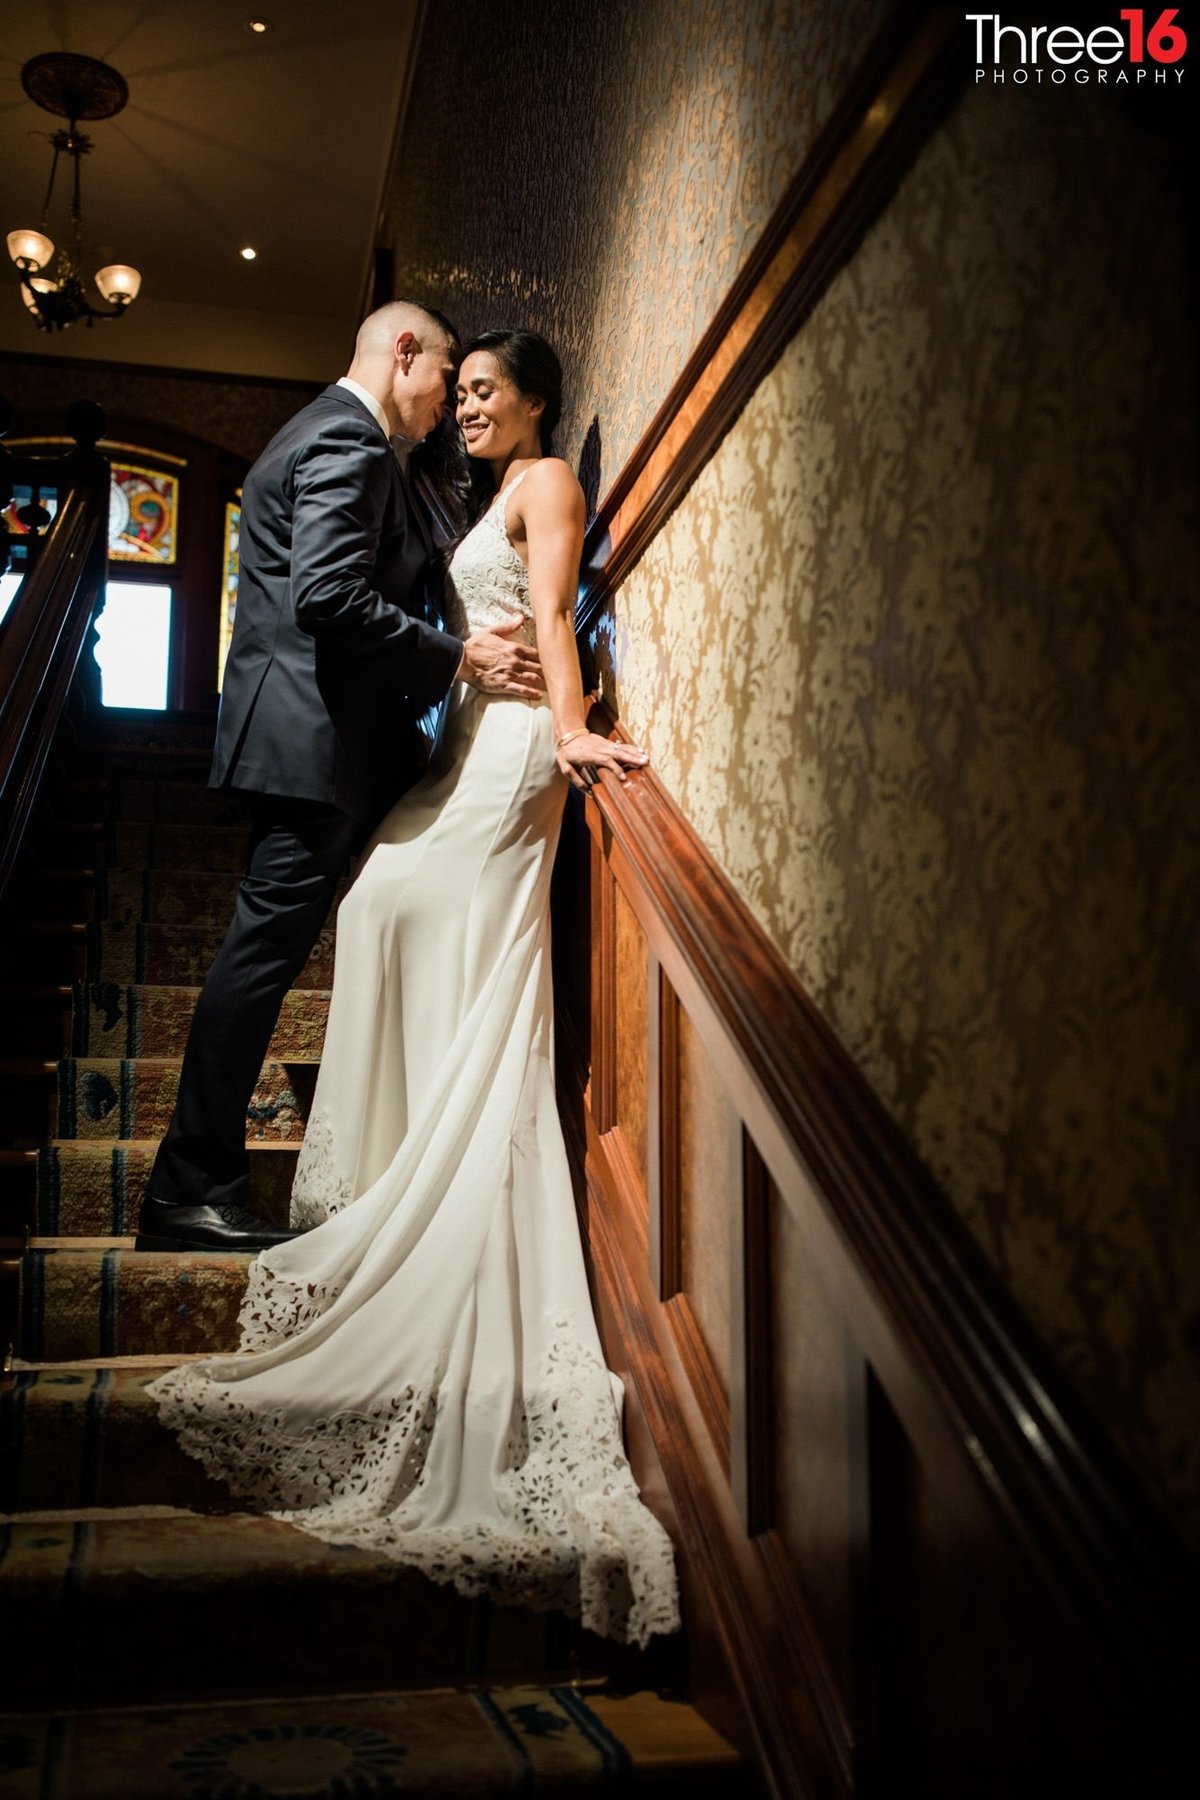 Intimate moment for Bride and Groom against the staircase railing